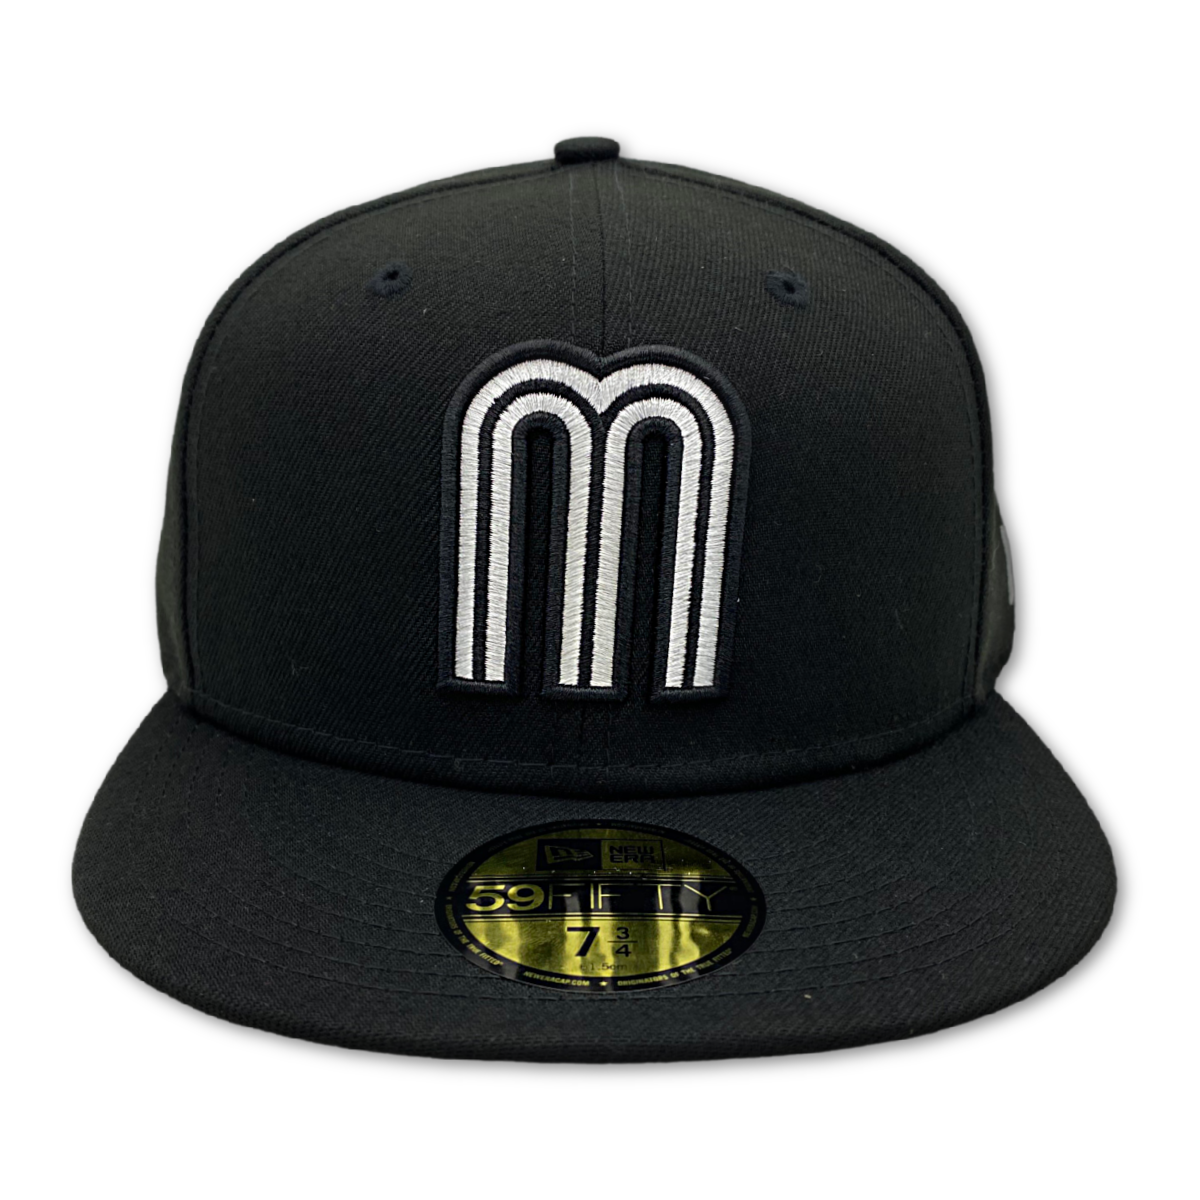 NEW ERA OFFICIAL MEXICO 59FIFTY FITTED HAT-BLACK nvsoccer.com The Coliseum